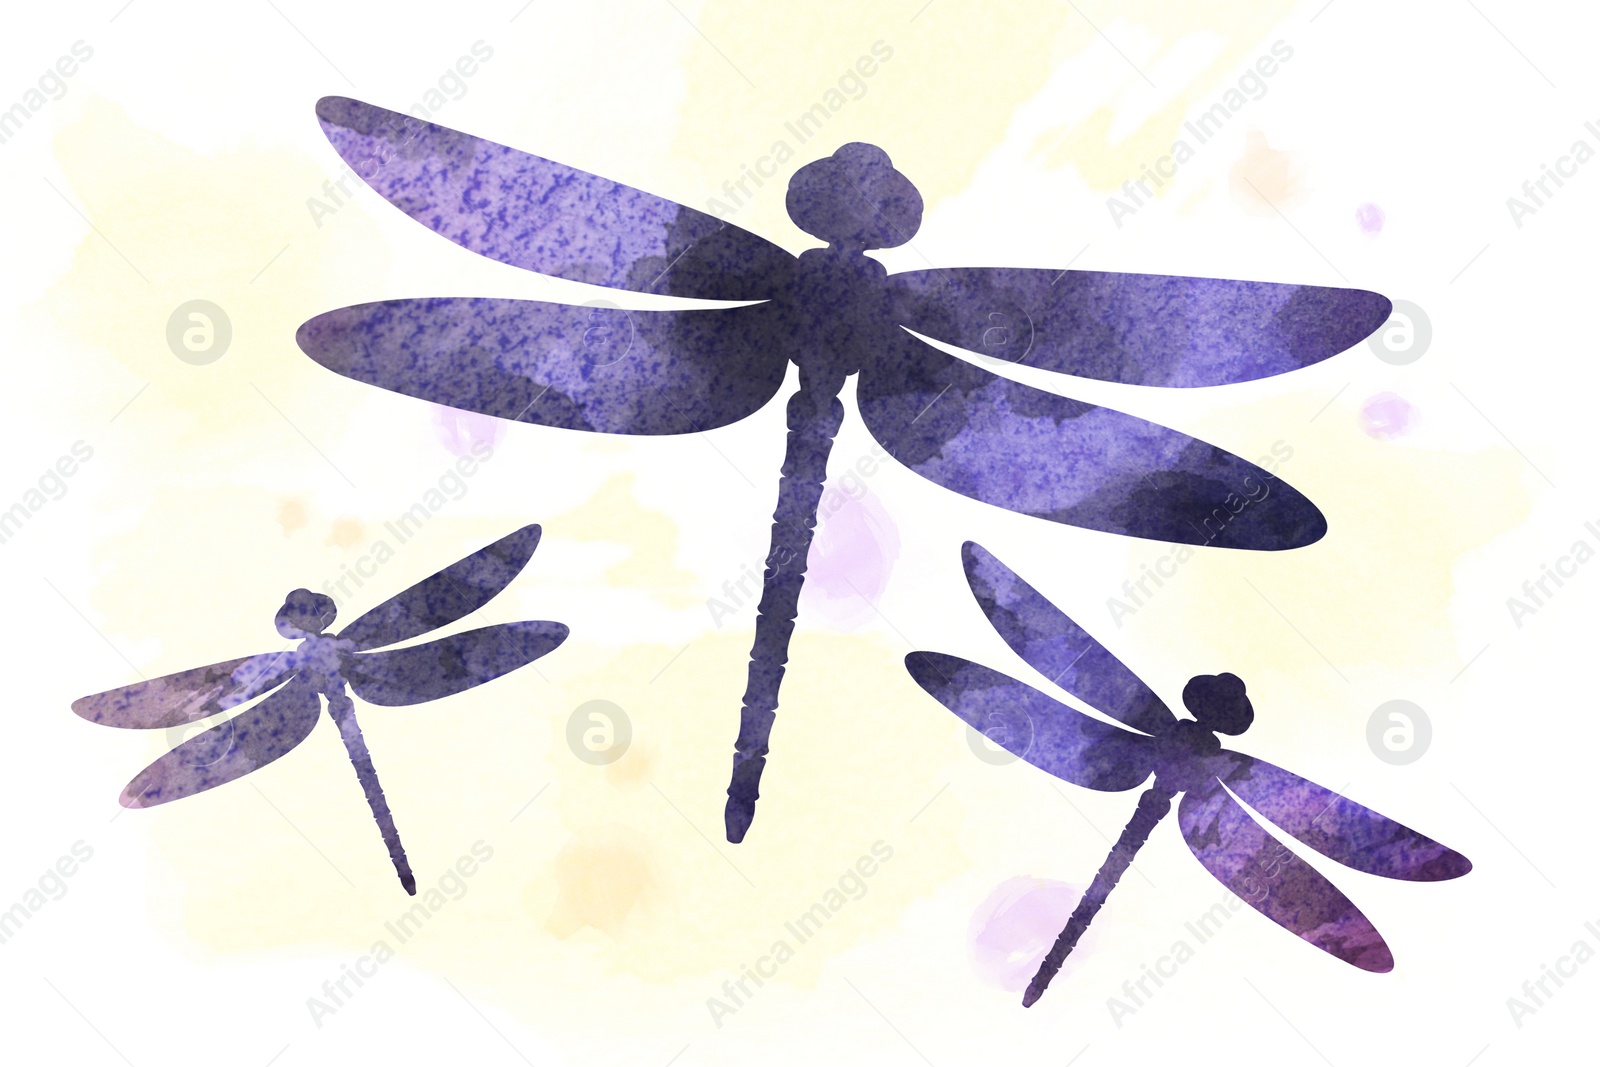 Illustration of Silhouettes of dragonflies drawn with watercolor paint on white background